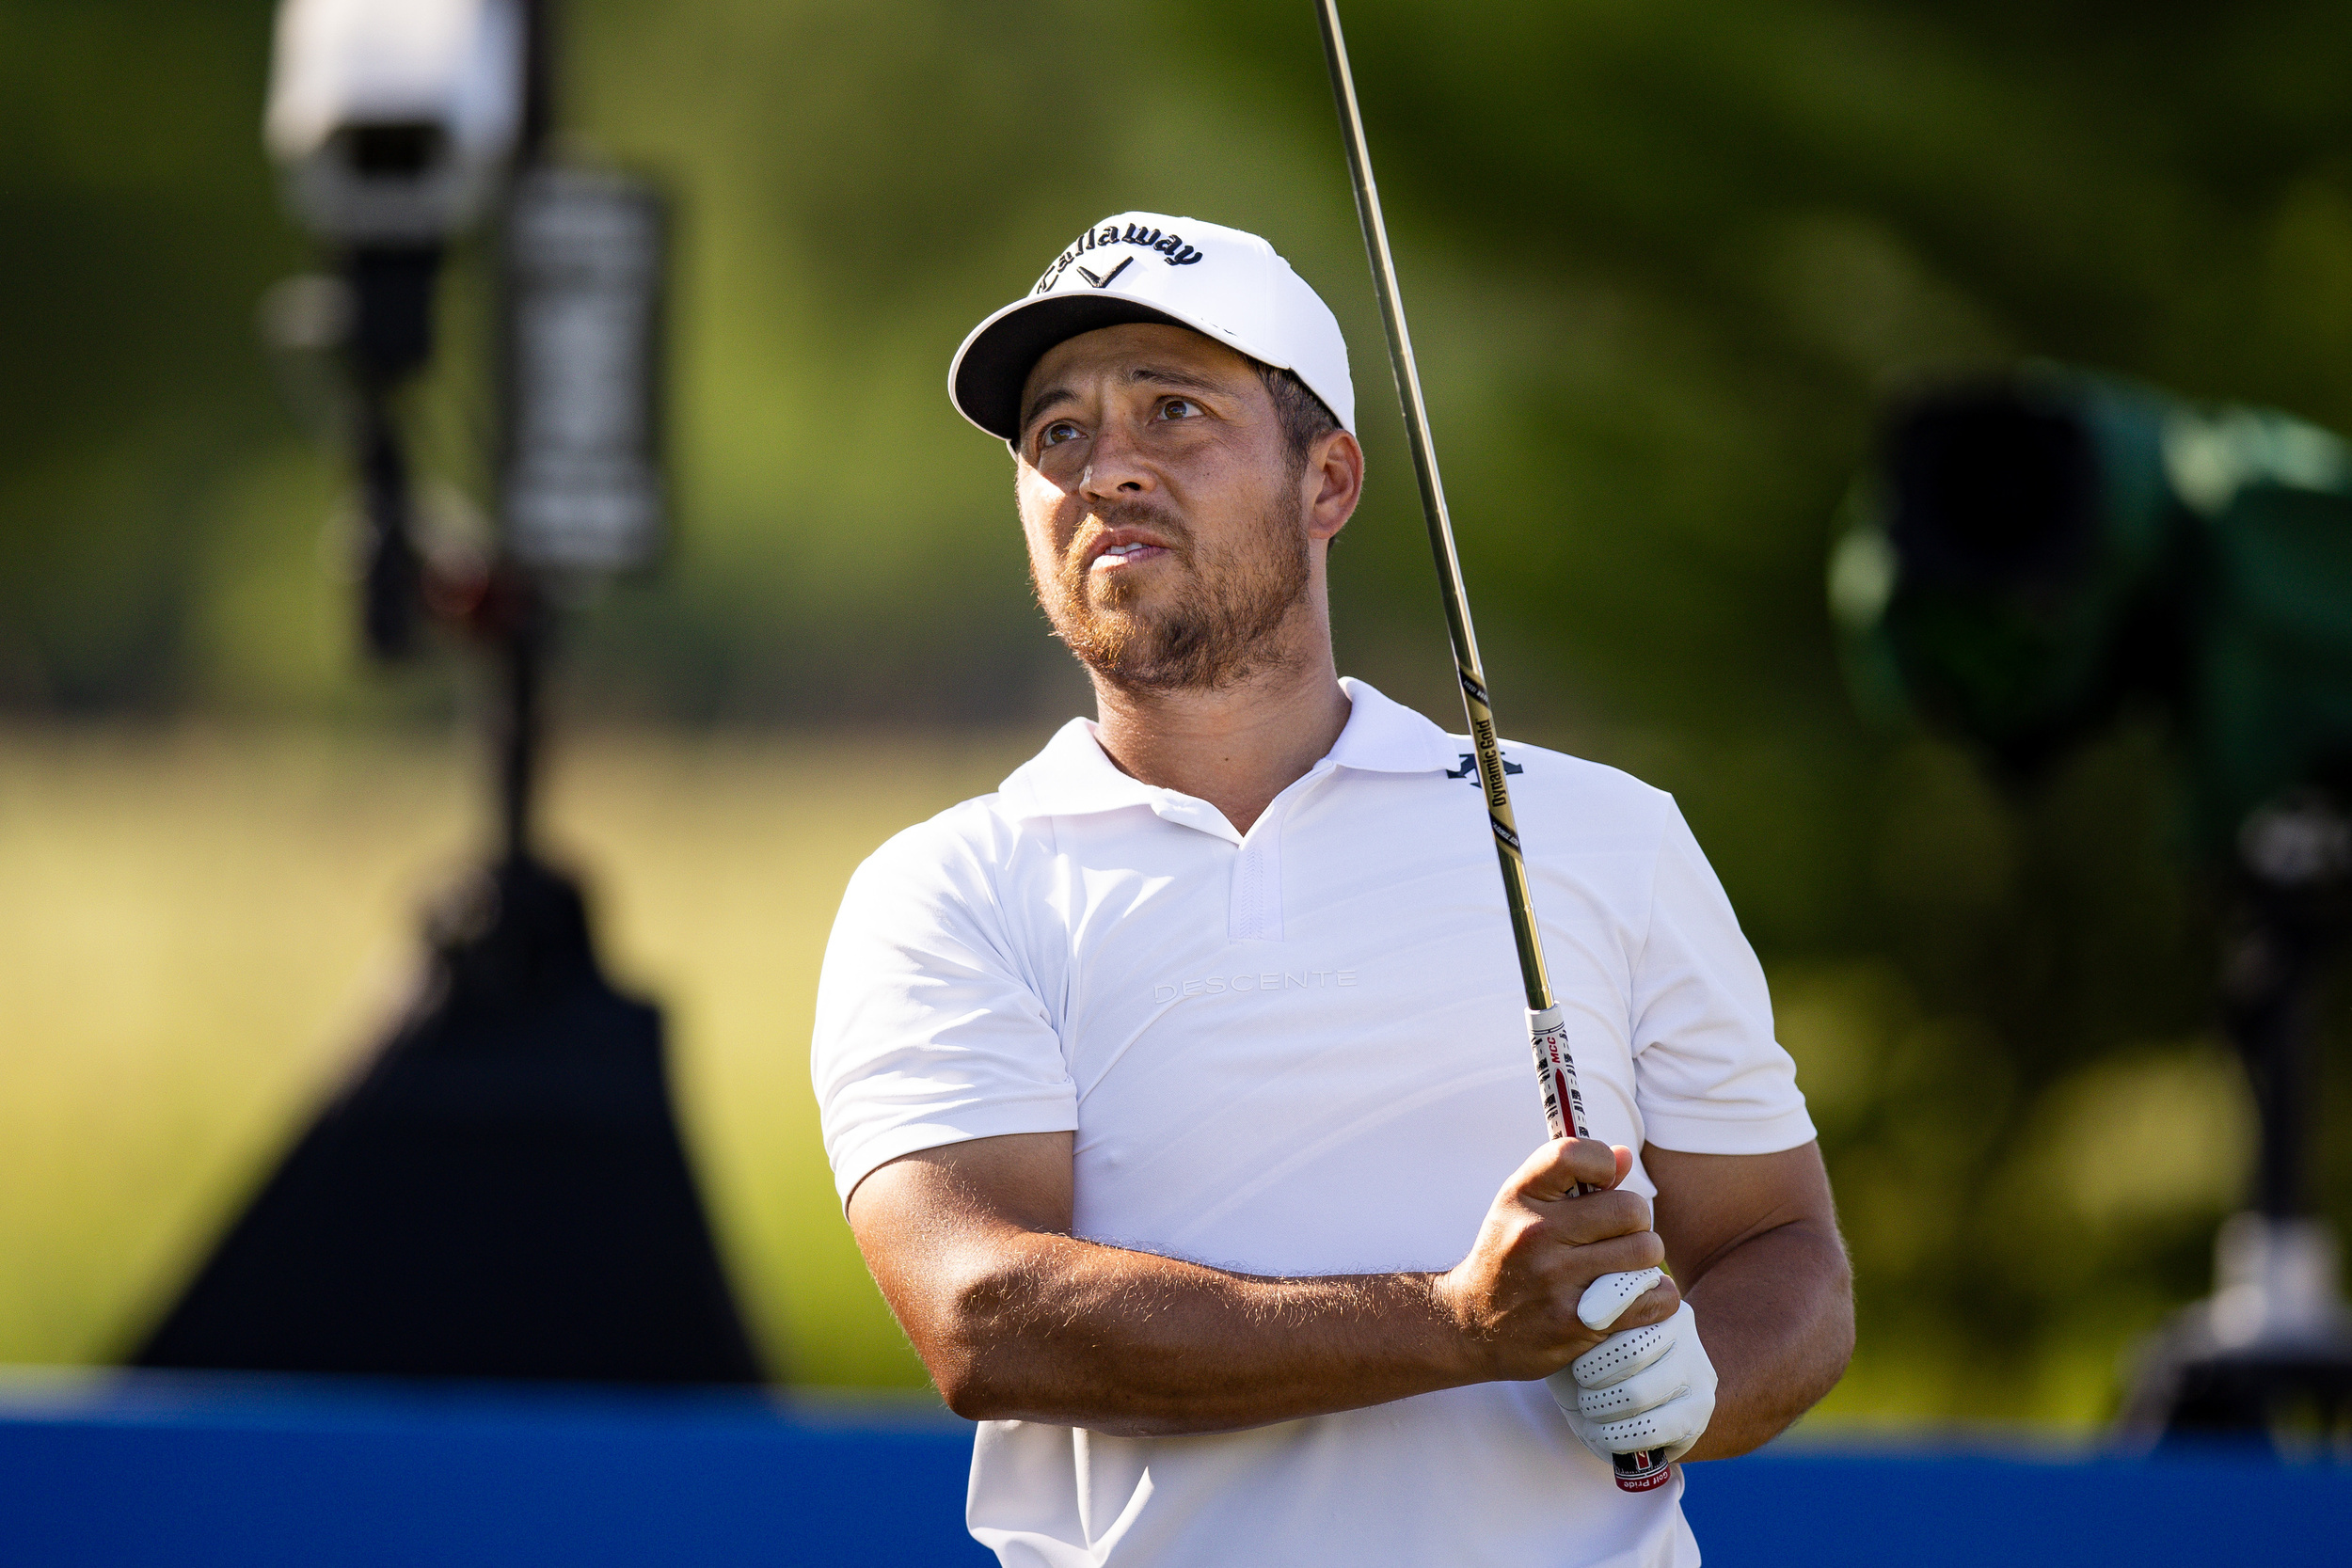 xander schauffele tops stacked leaderboard after first round of wells fargo championship